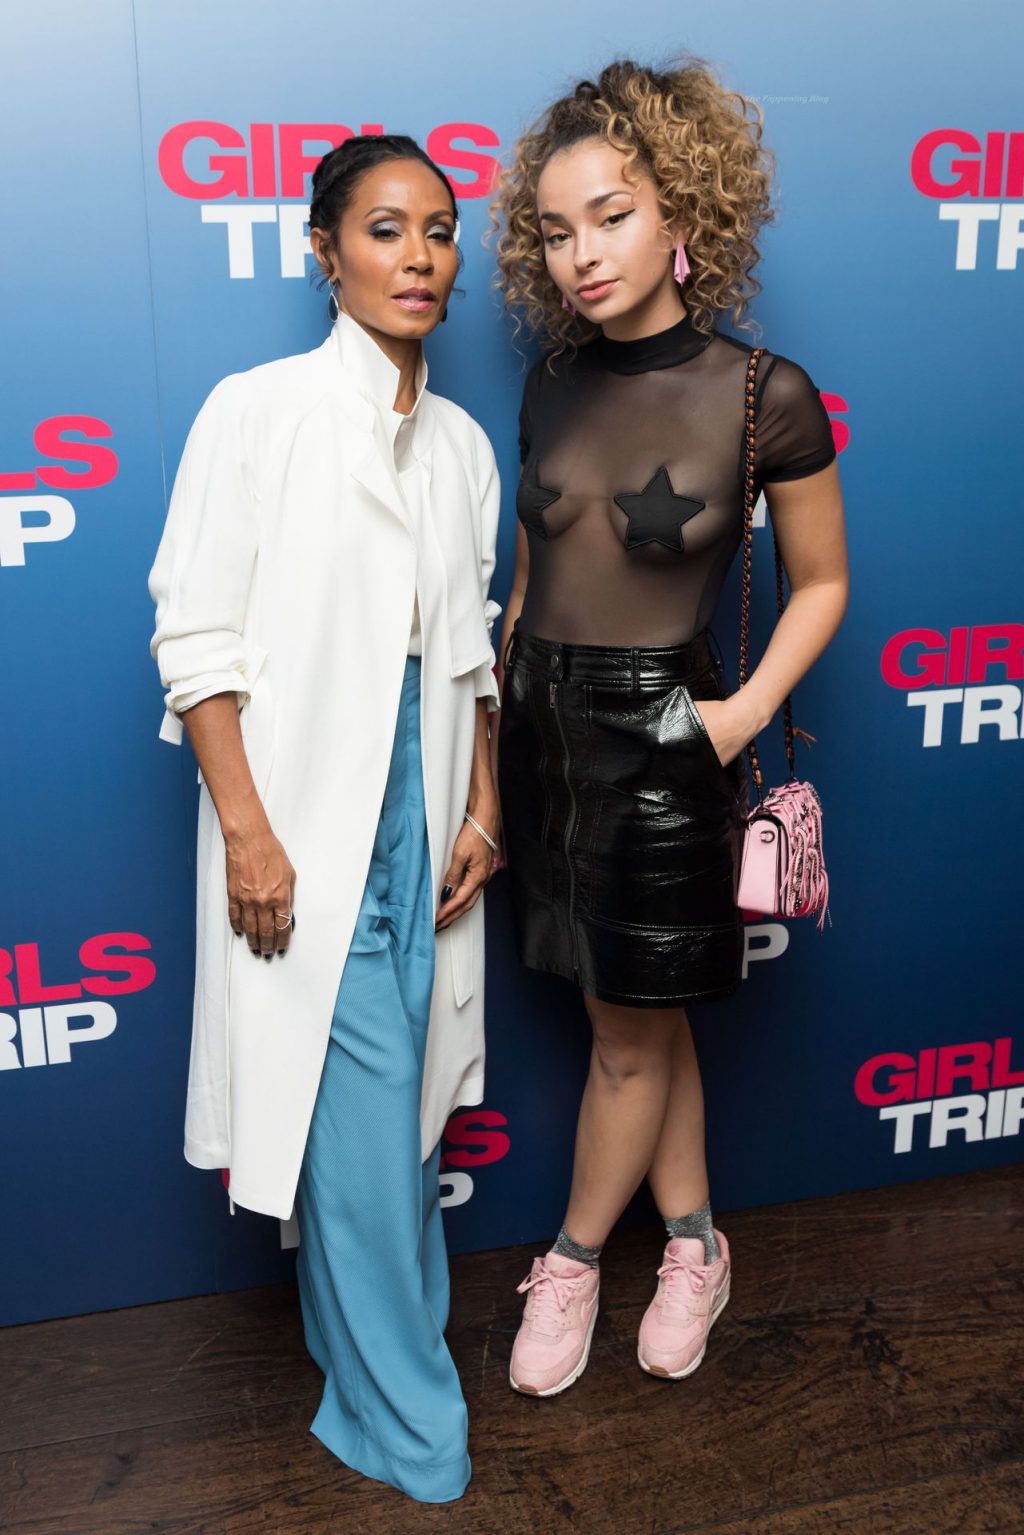 Braless Ella Eyre Attends a Special Screening of Girls Trip at the Soho Hotel (6 Photos)